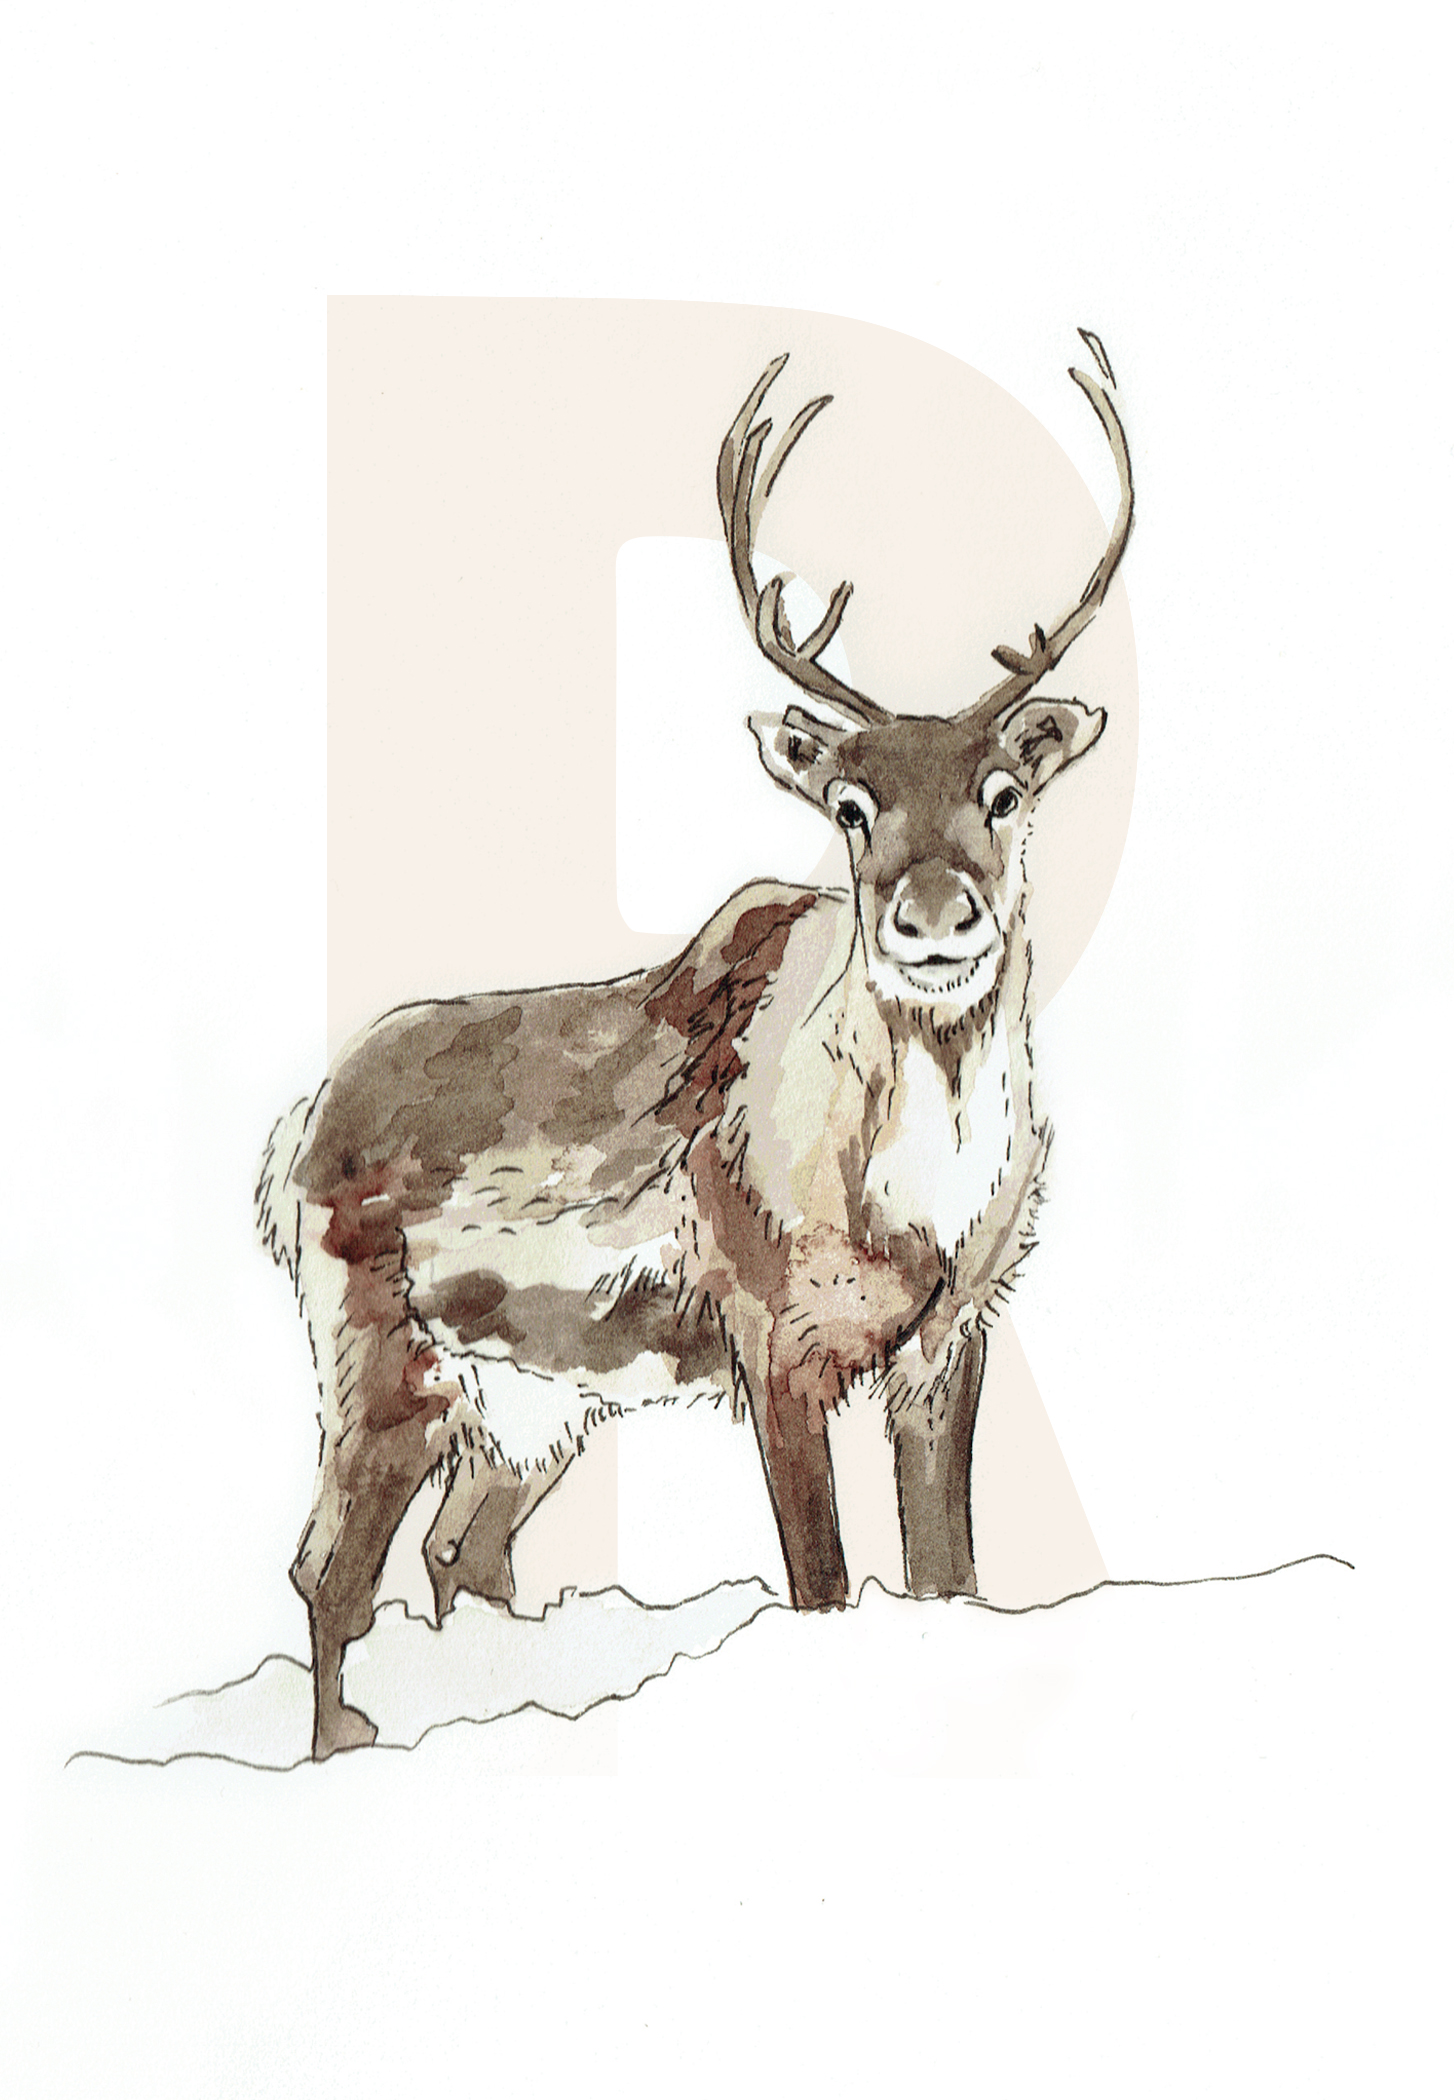 R is for Reindeer